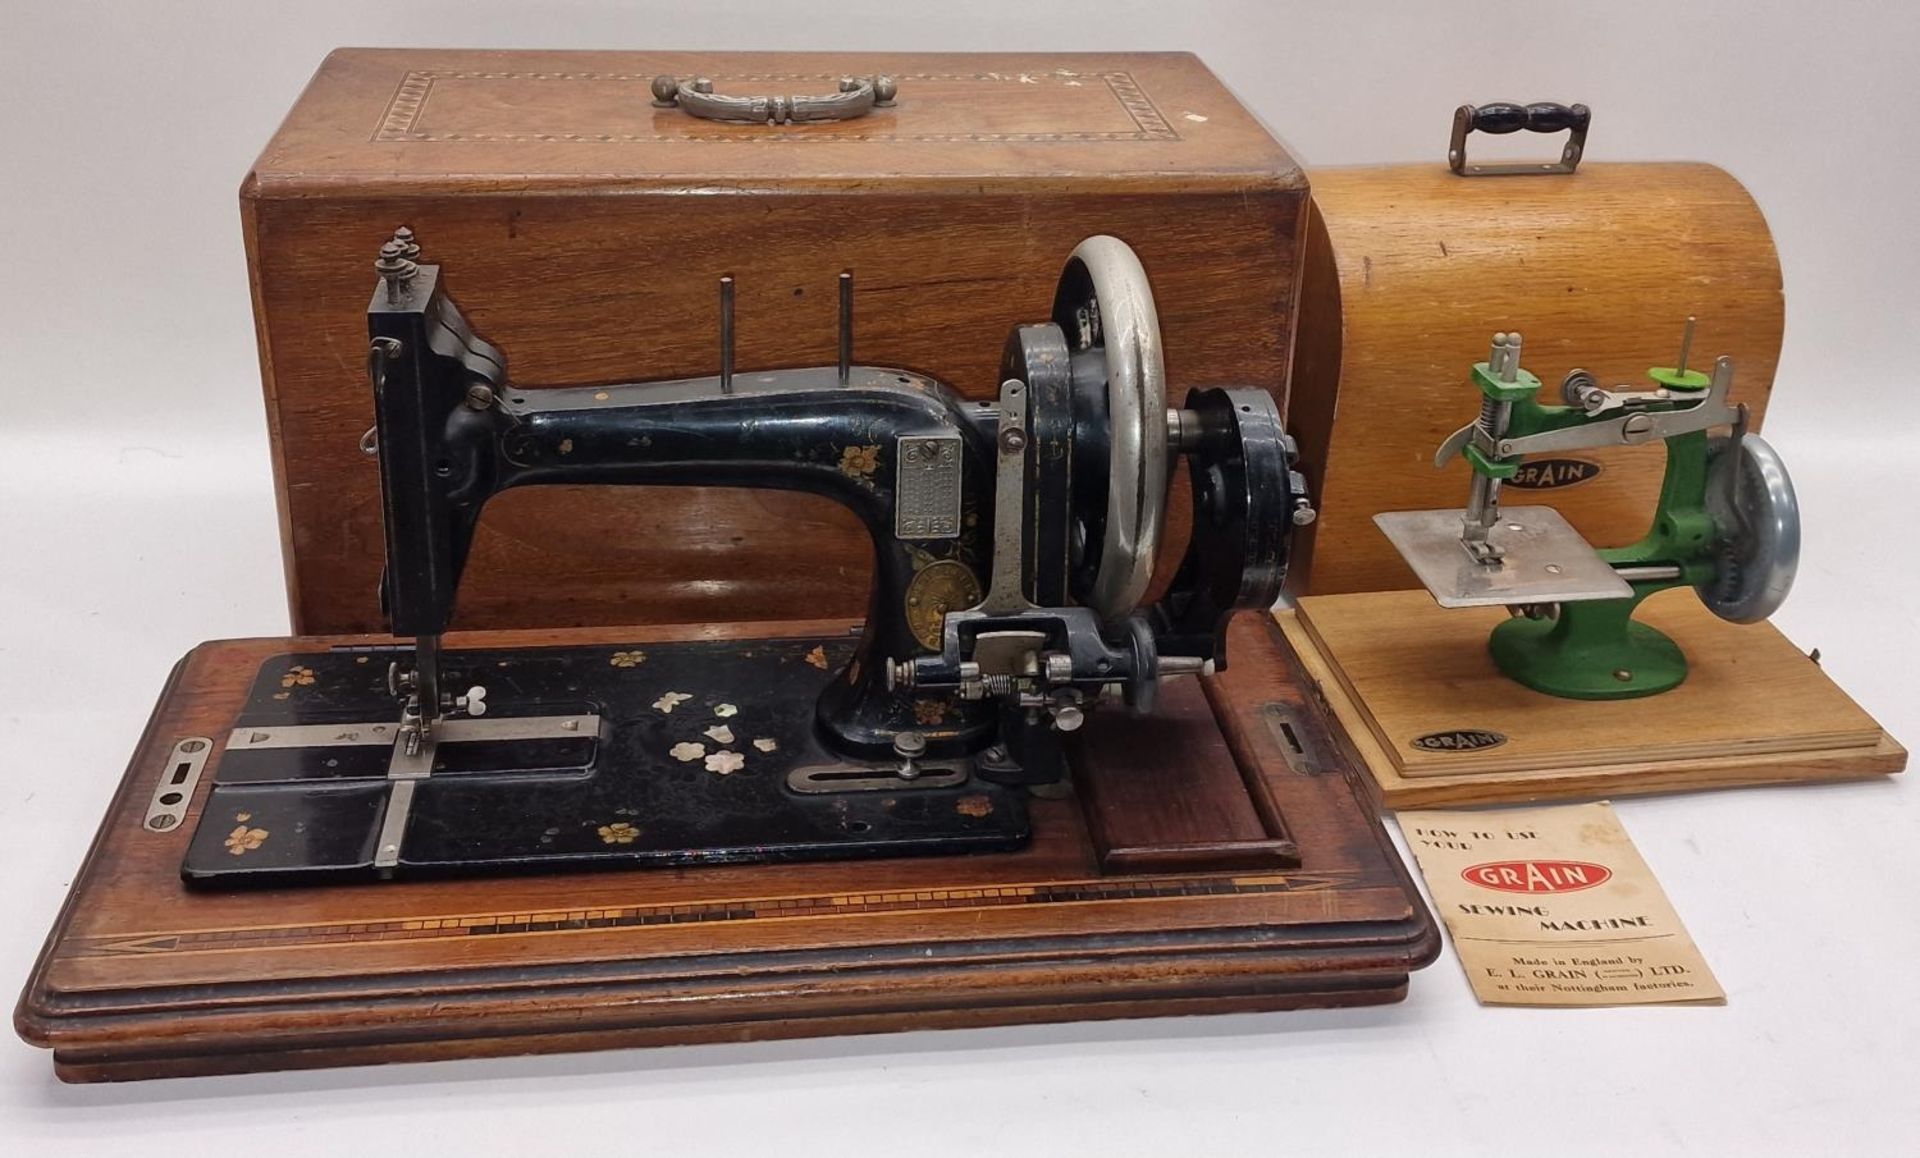 Vintage Grain miniature toy sewing machine together with a larger sewing machine.